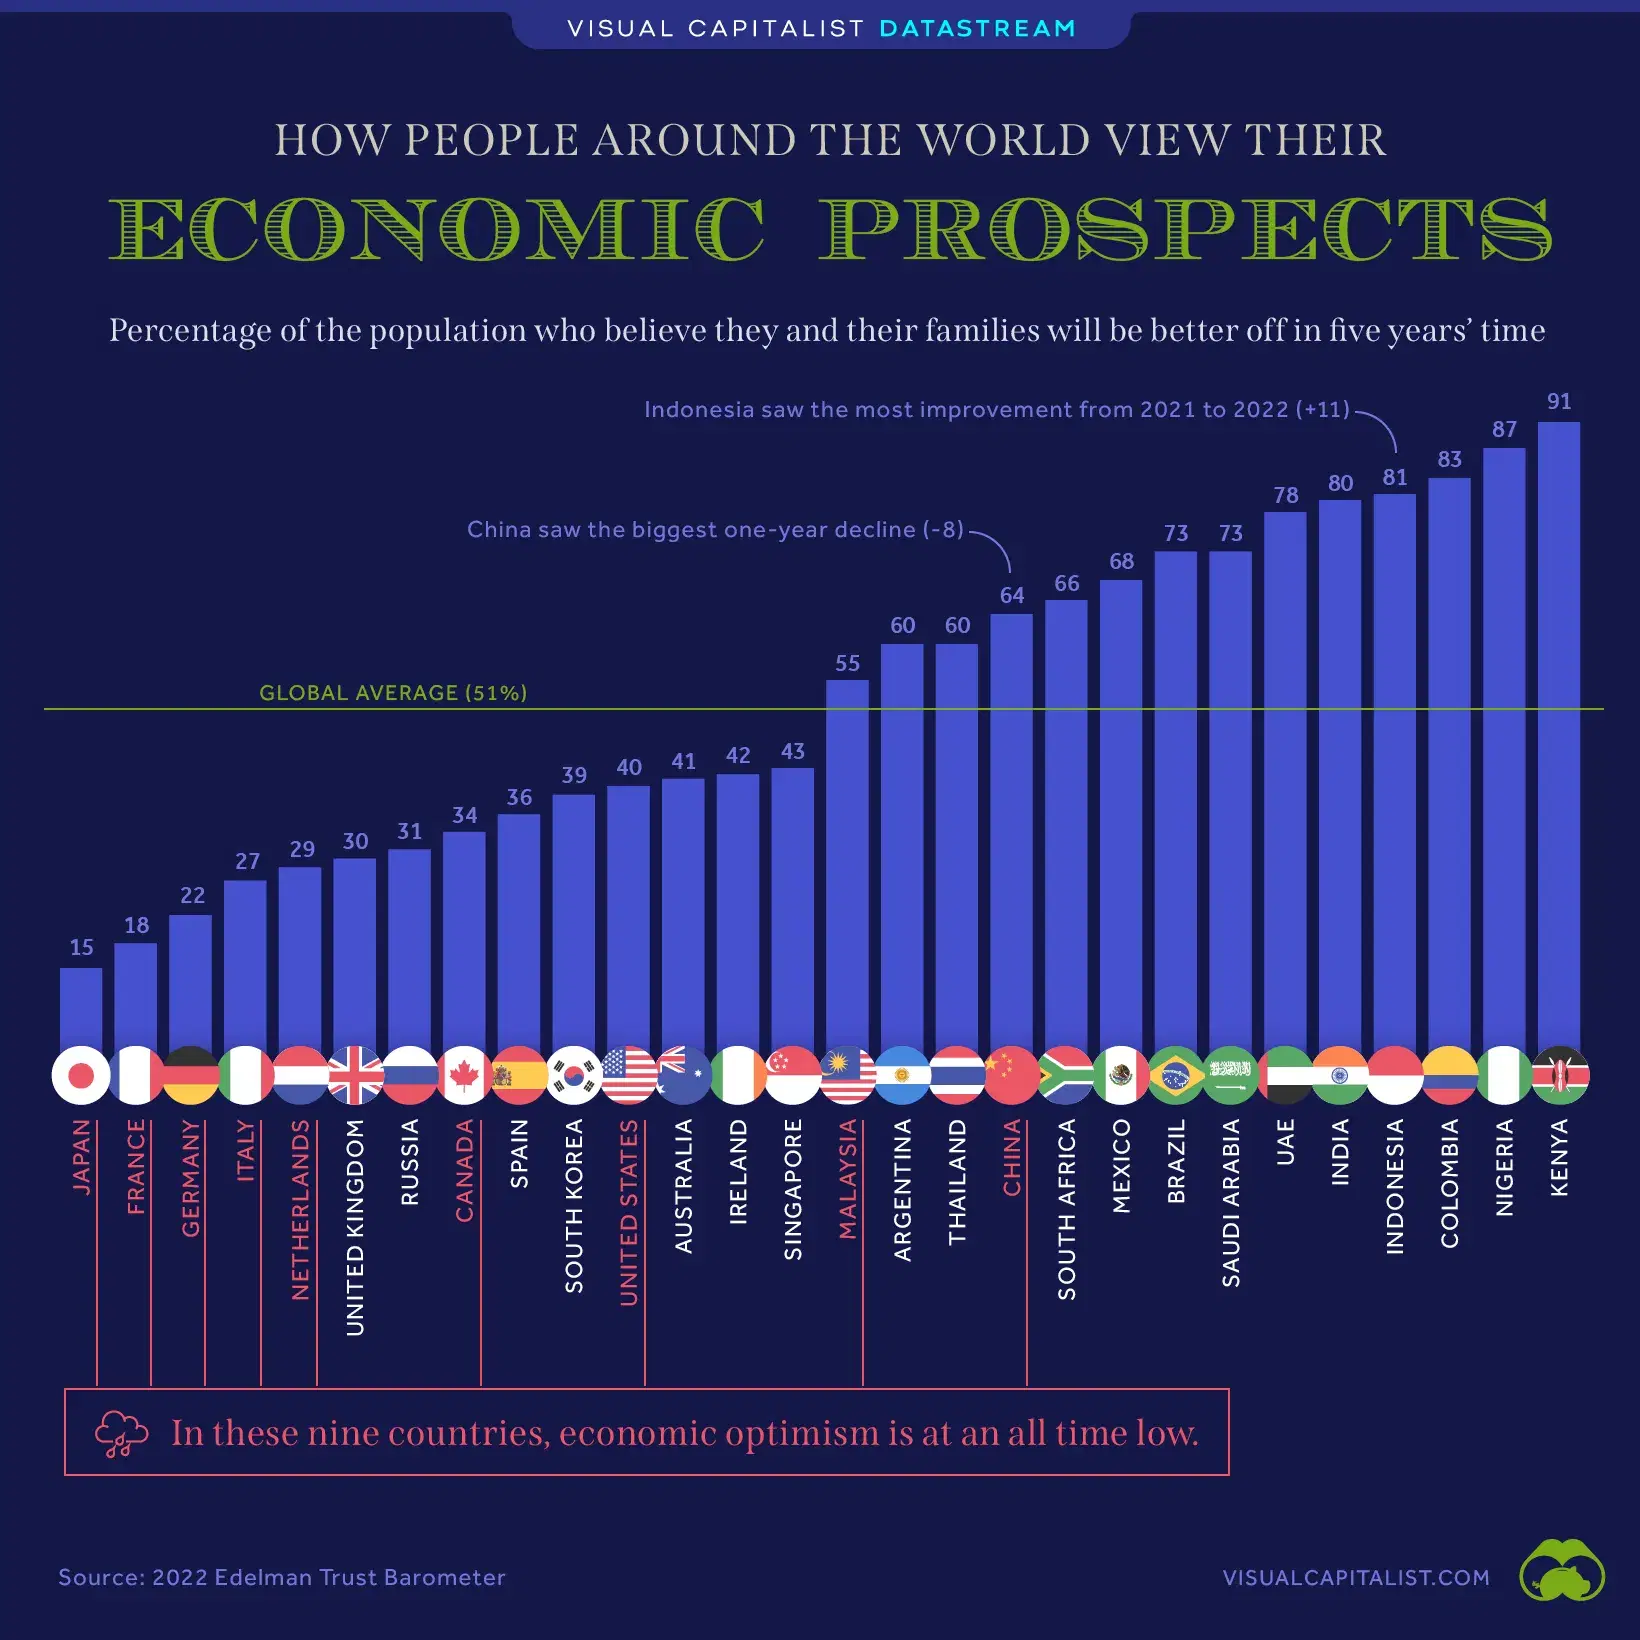 How People Around the World Feel About Their Economic Prospects